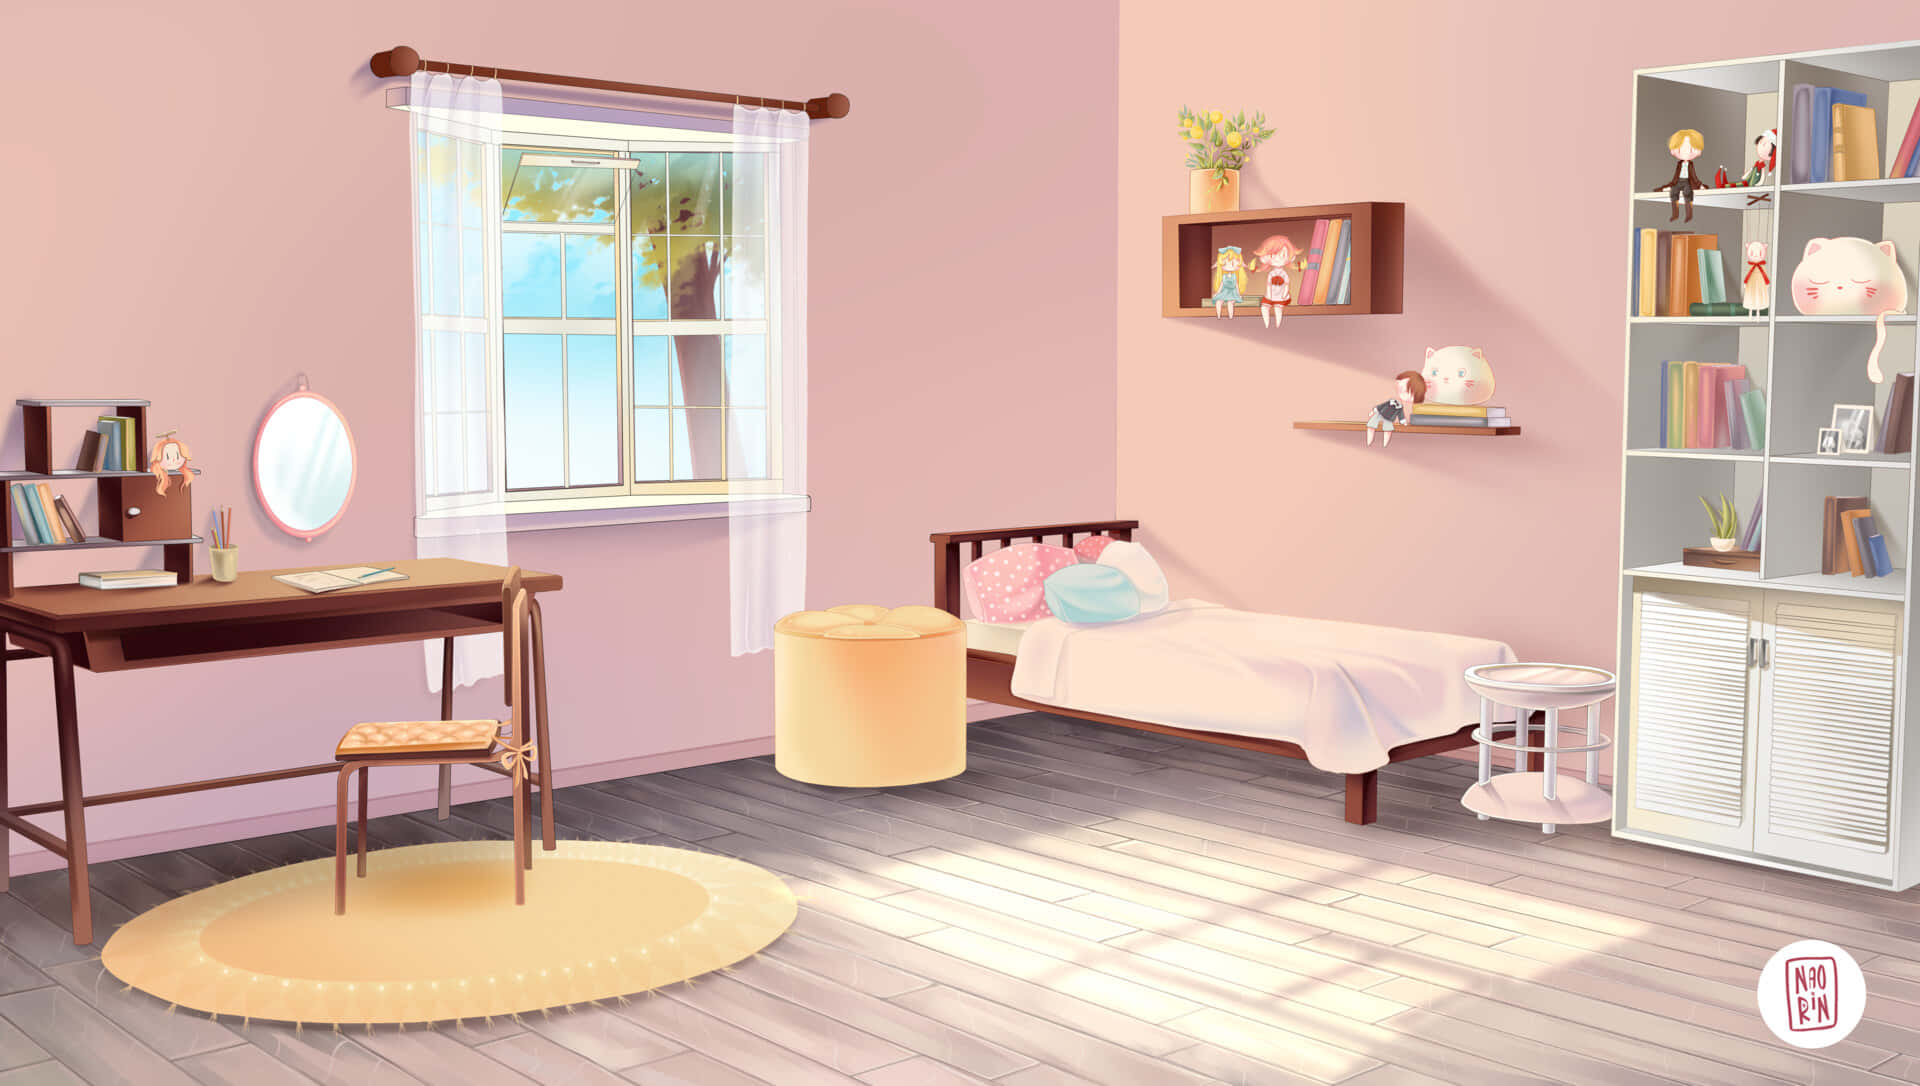 Lexica - A gamergirl bedroom, colorful anime movie background, key visual,  bamboo, a fantasy digital painting by makoto shinkai and james gurney,  tre...